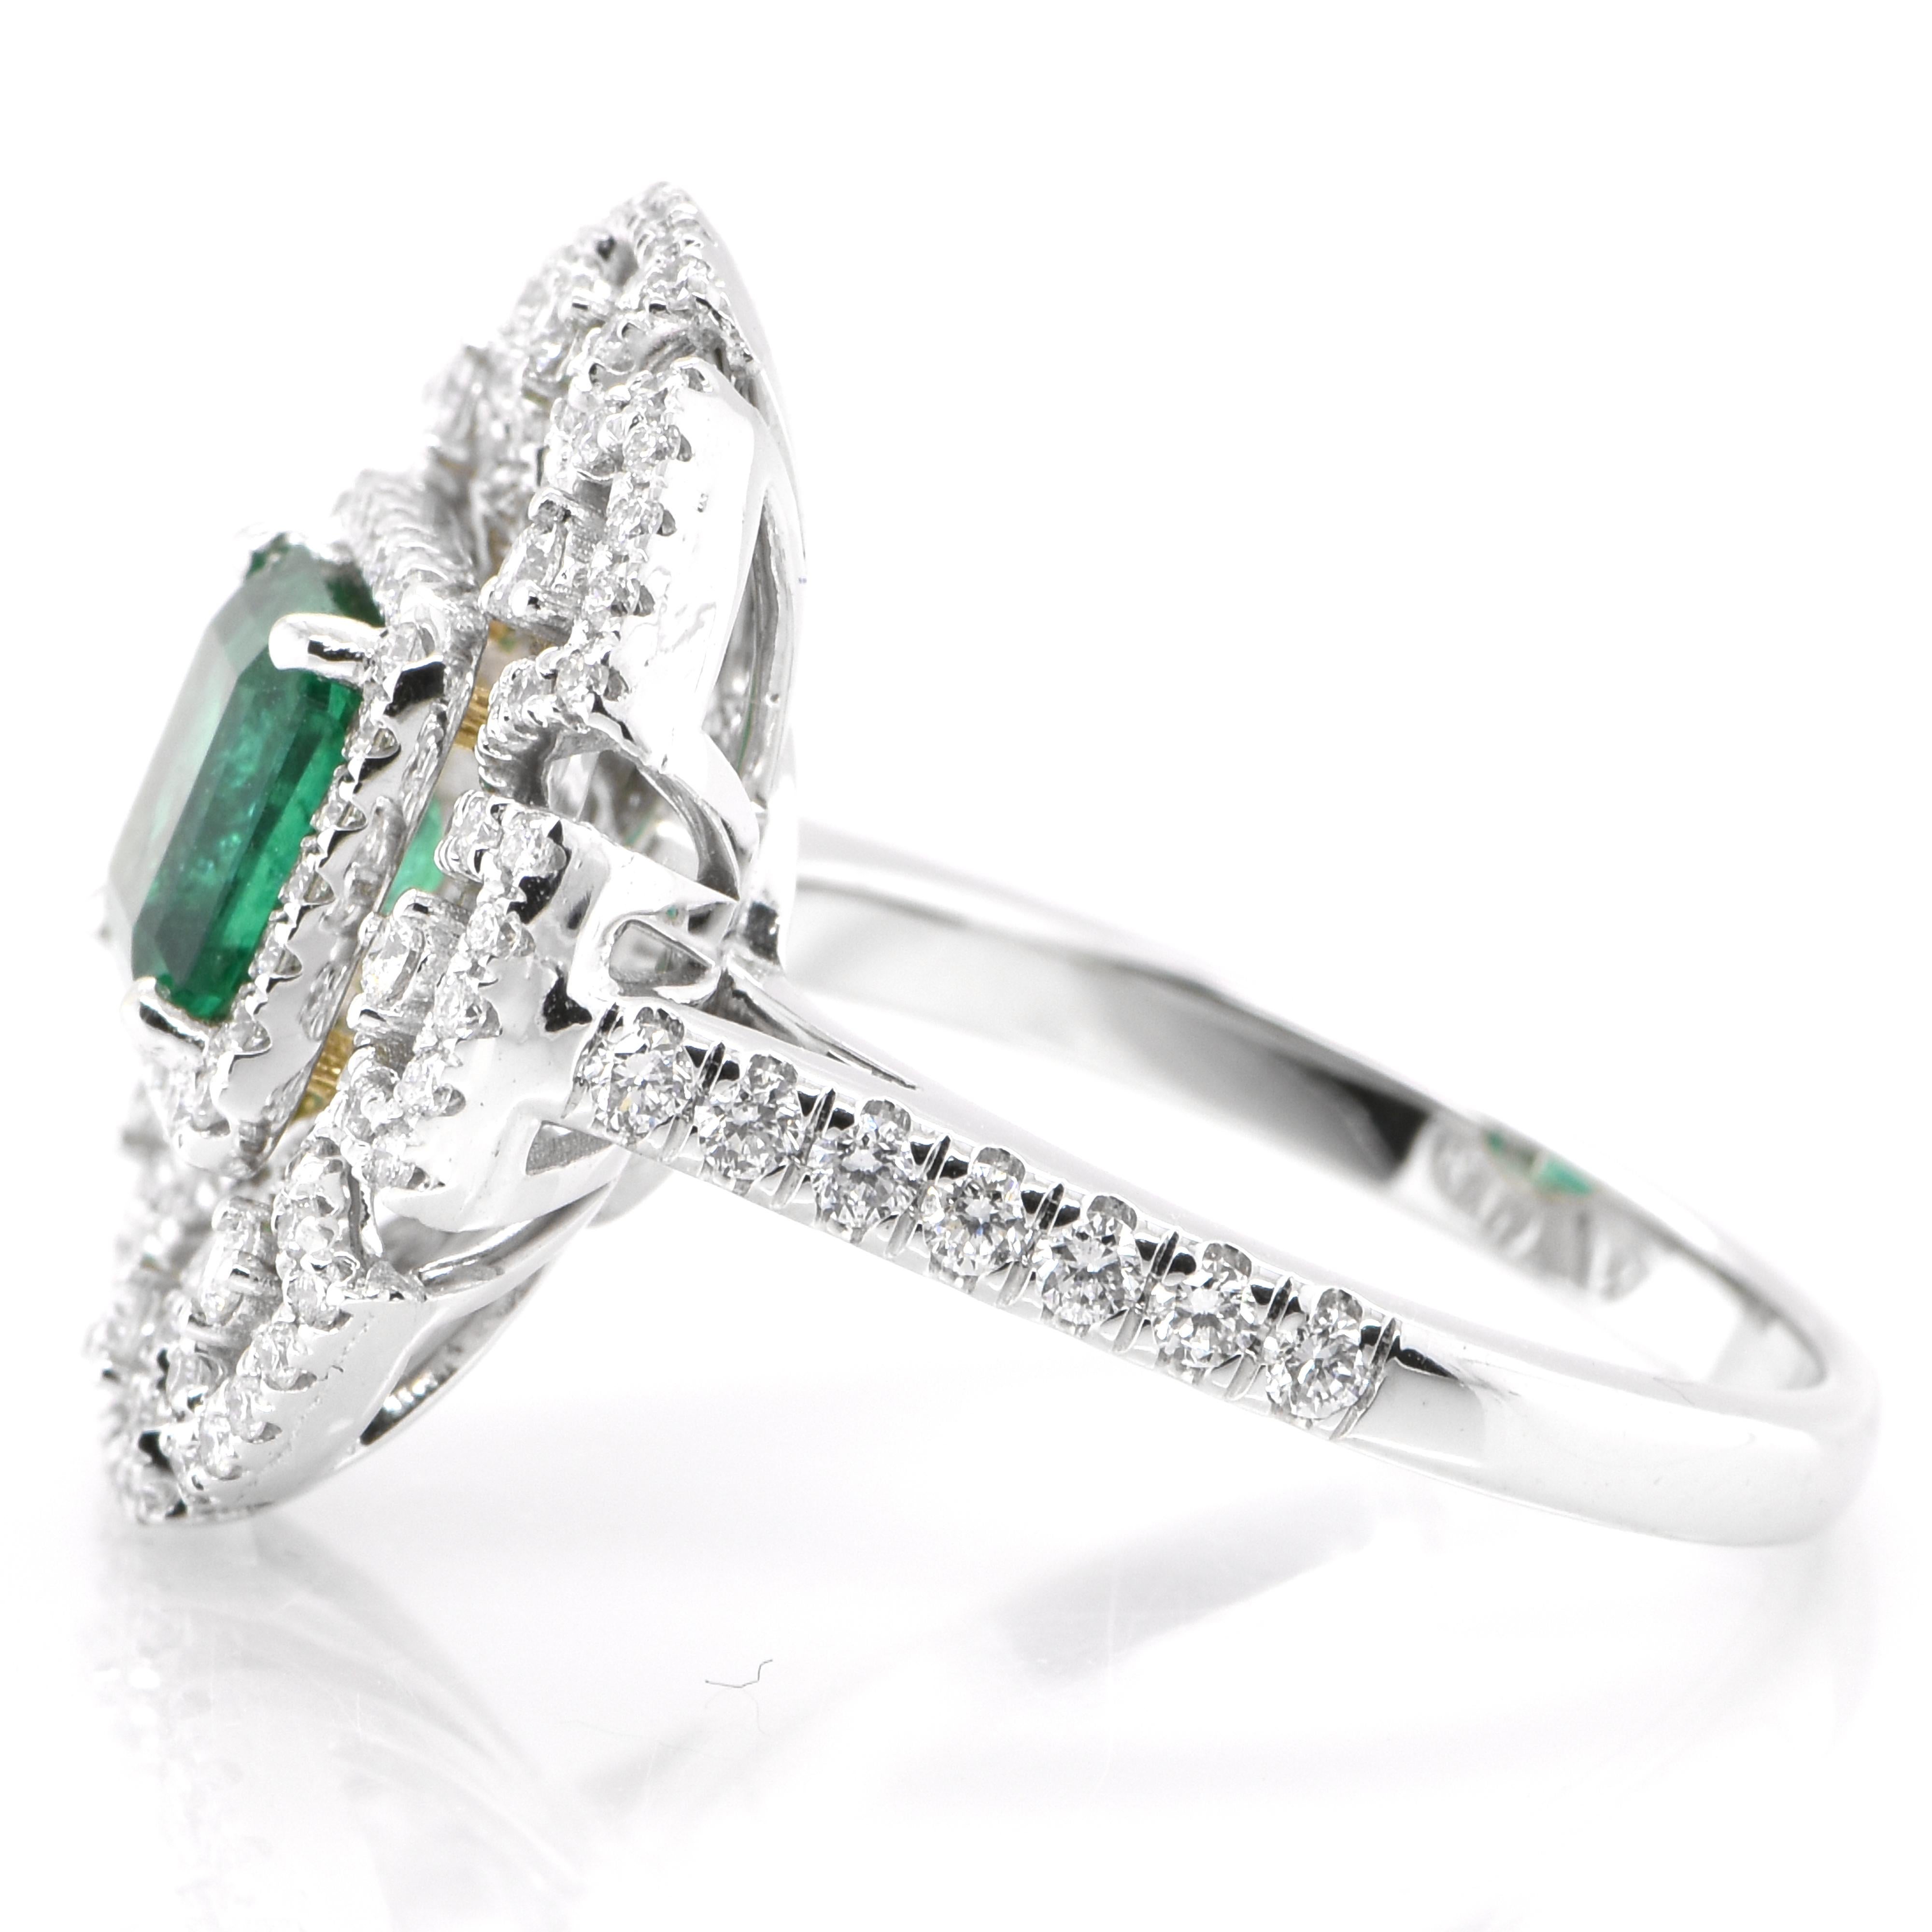 Emerald Cut 1.19 Carat Natural Emerald and Diamond Cocktail Ring Set in 18K White Gold For Sale